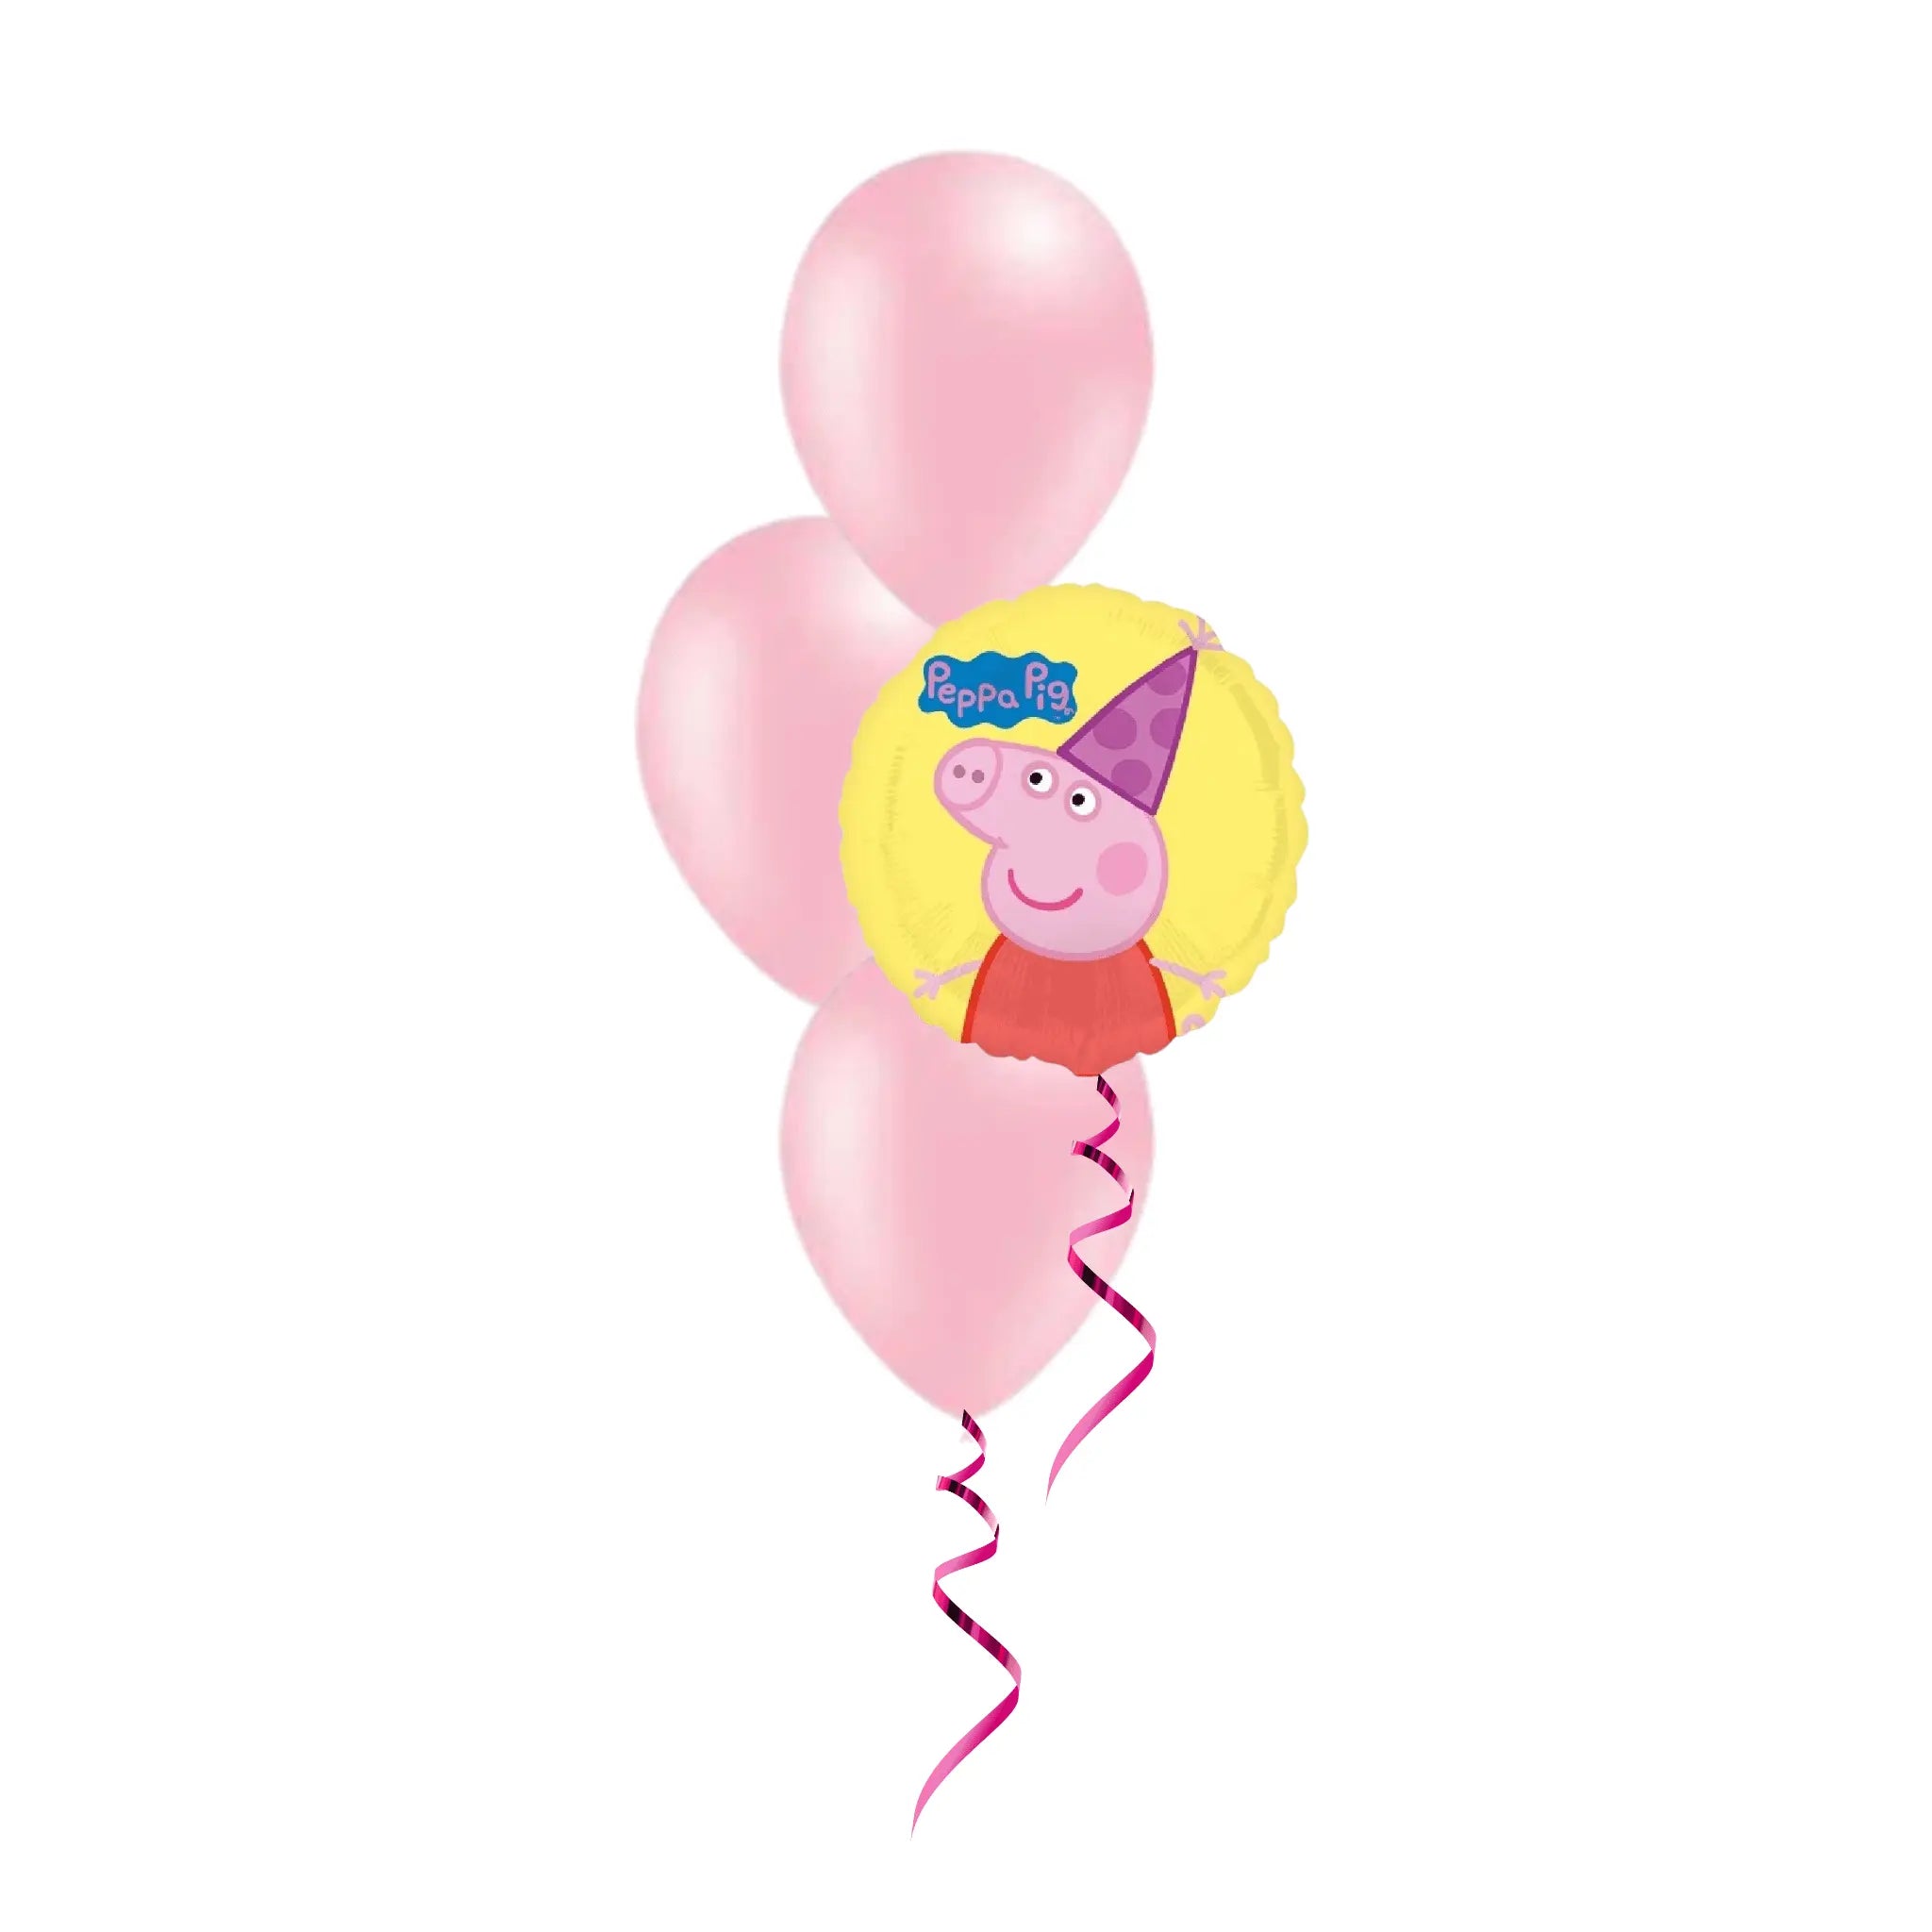 Peppa Pig Balloon Bouquet | The Party Hut